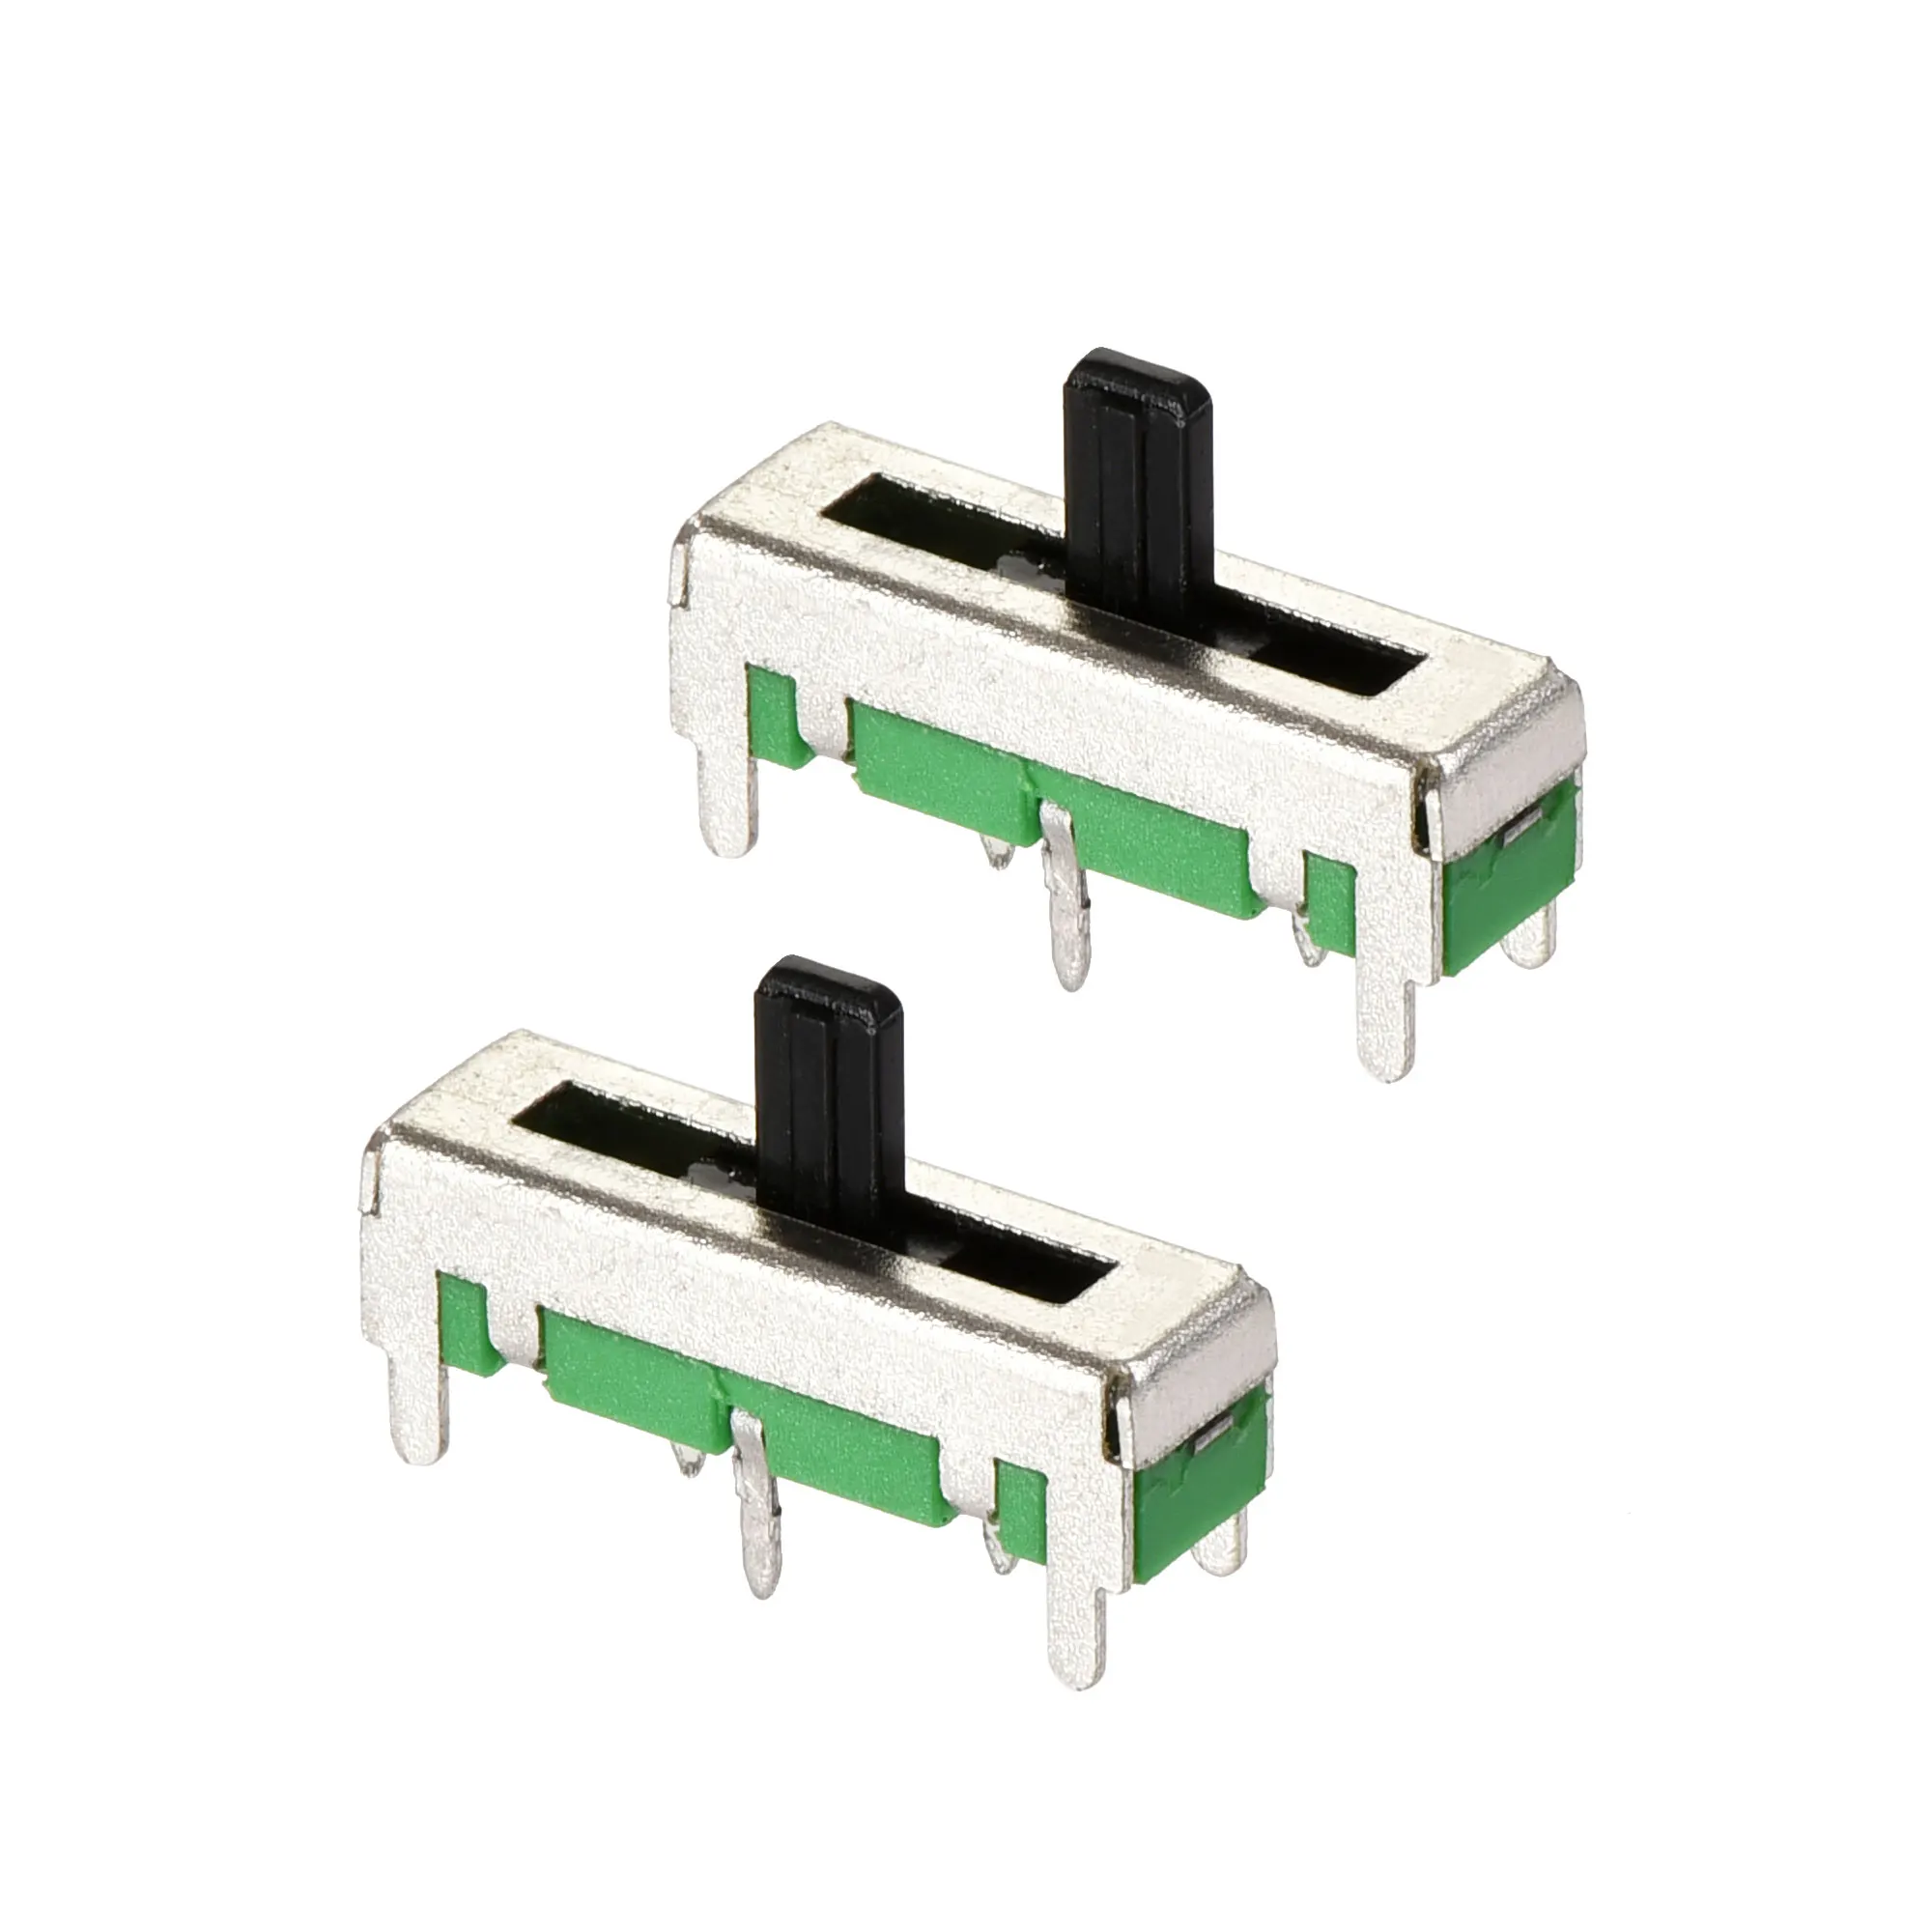 

Uxcell Fader Variable Resistors Mixer 18mm Straight Slide Potentiometer B20K Ohm Single Channel 2 Pcs